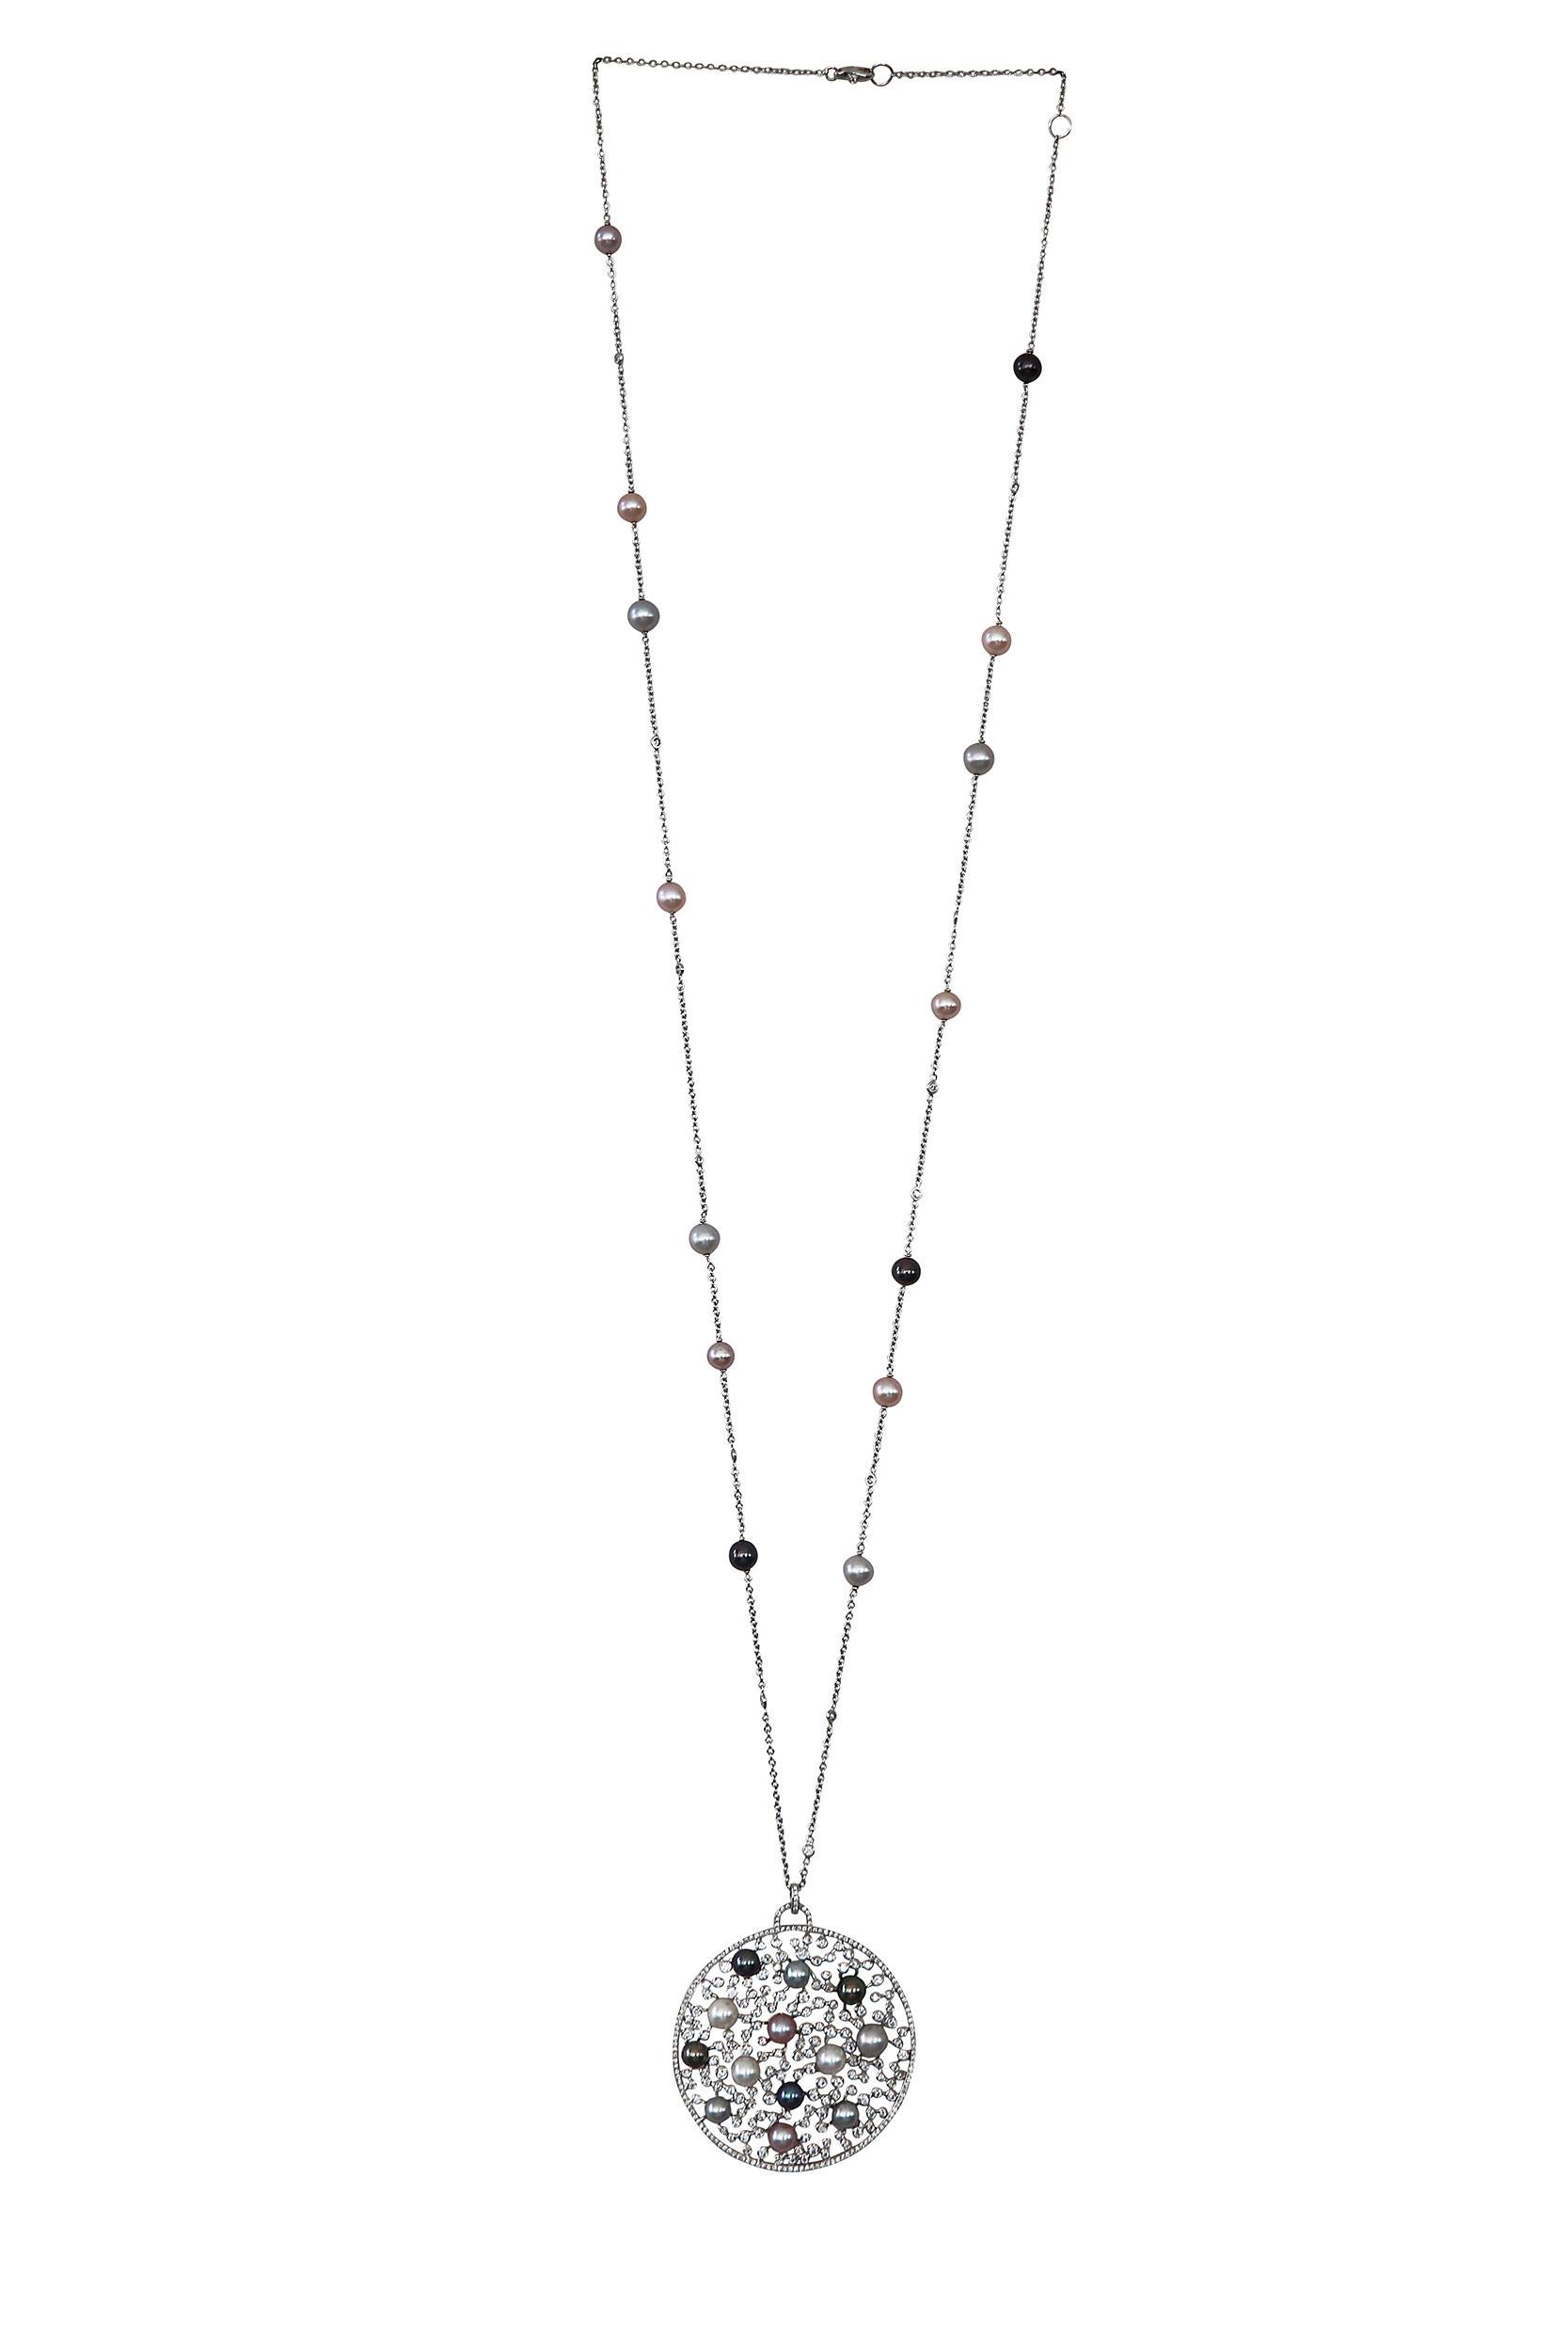 Modern 5.16 Carat White GSI Diamonds Pearls White Gold Pendant Long Chain Necklace For Sale